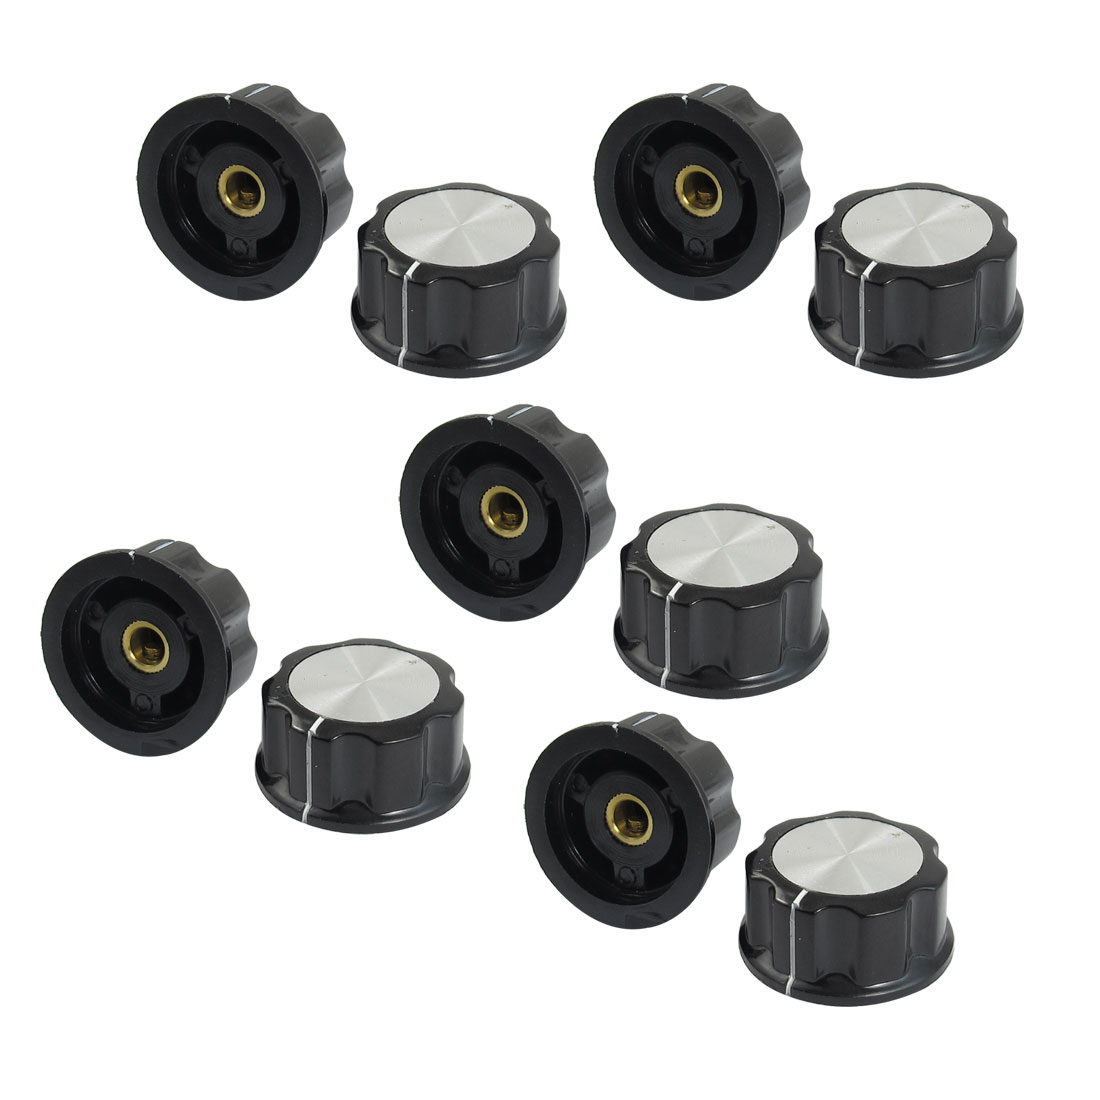 Unique Bargains 10pcs Adjustable Turn 30mm Top 6mm Shaft Insert Dia Potentiometer Rotary Knobs